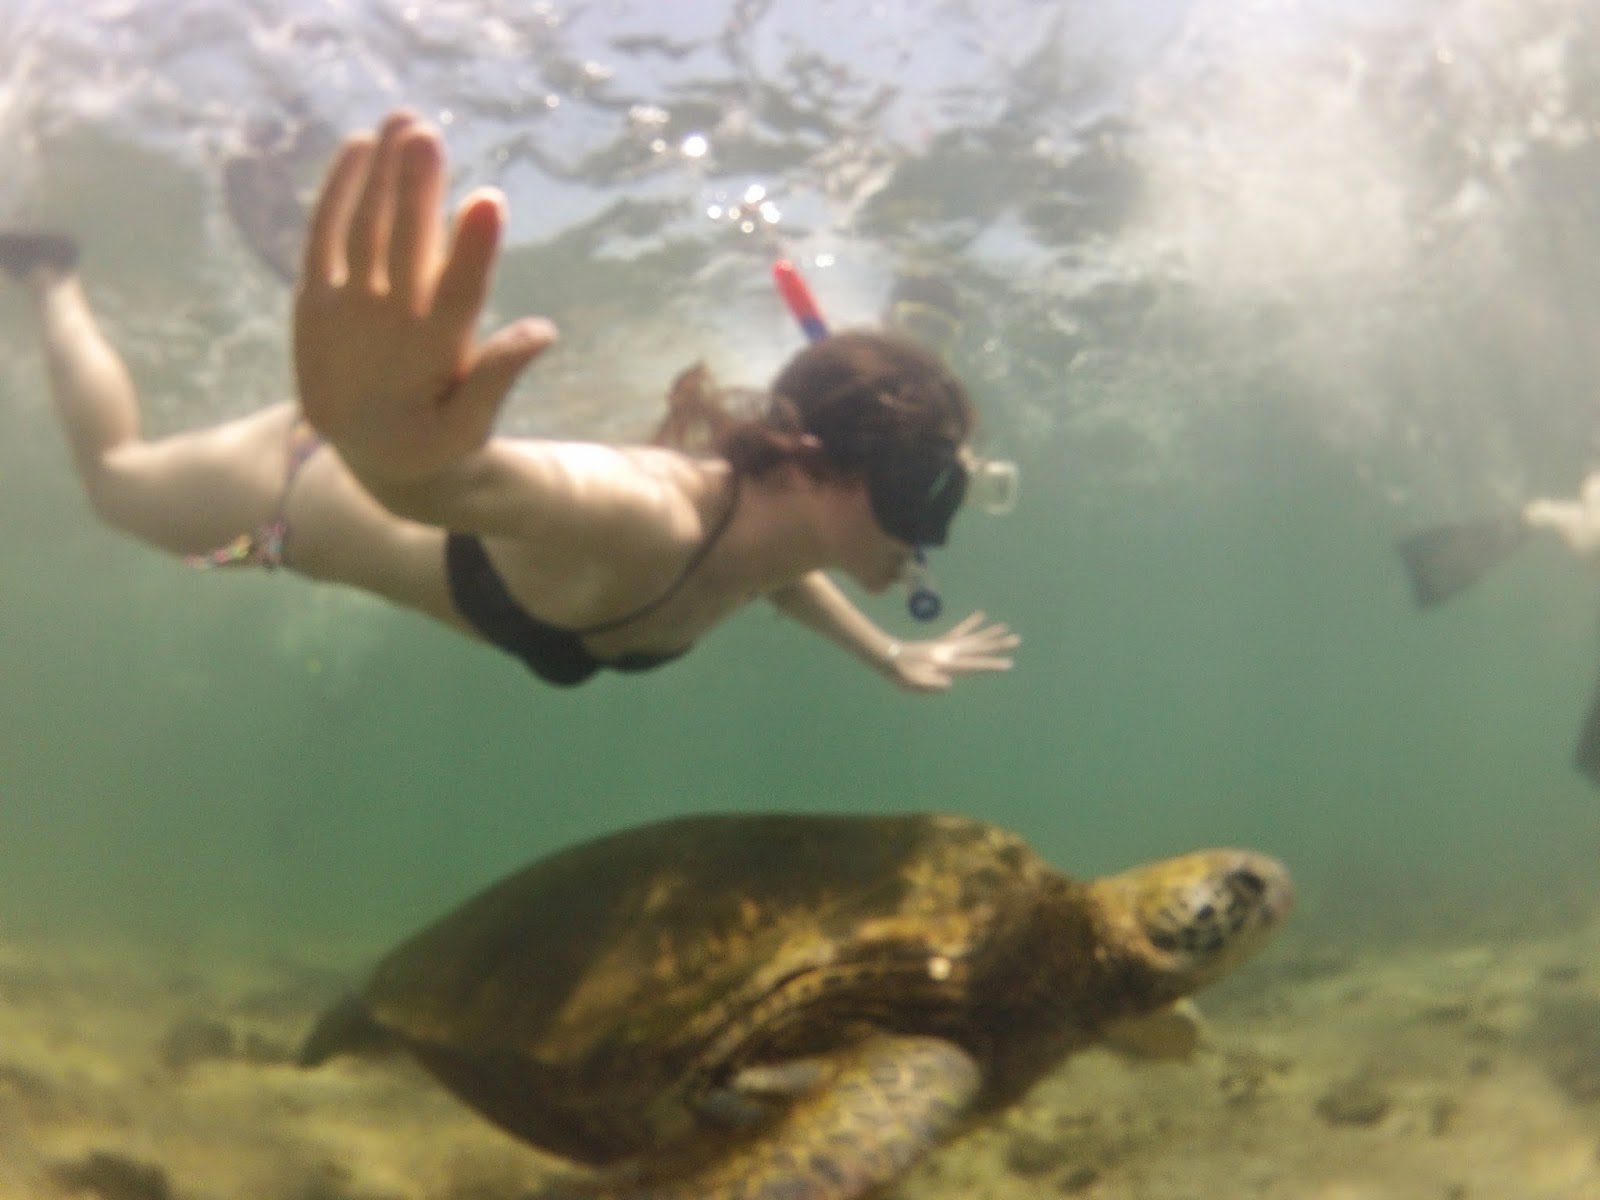 Just an average day, swimming with sea turtles.